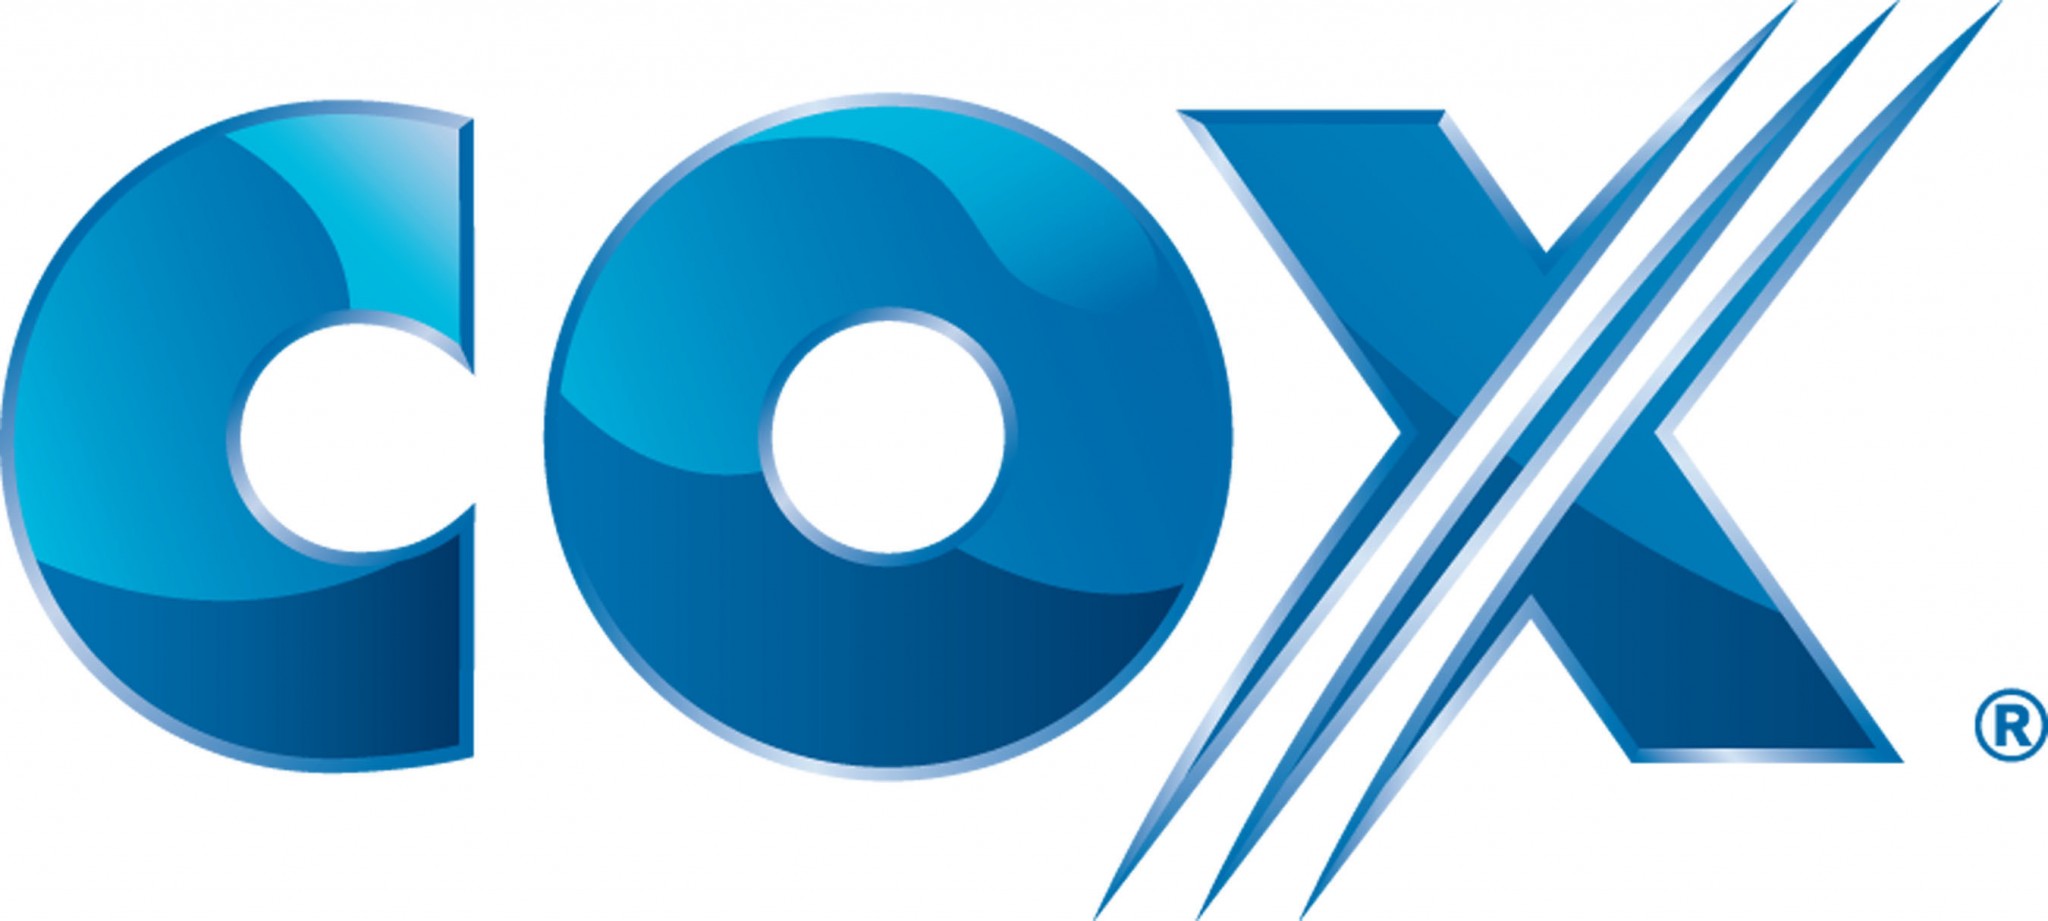 Cox Cable TV is Expanding Its New High-Speed Internet Service